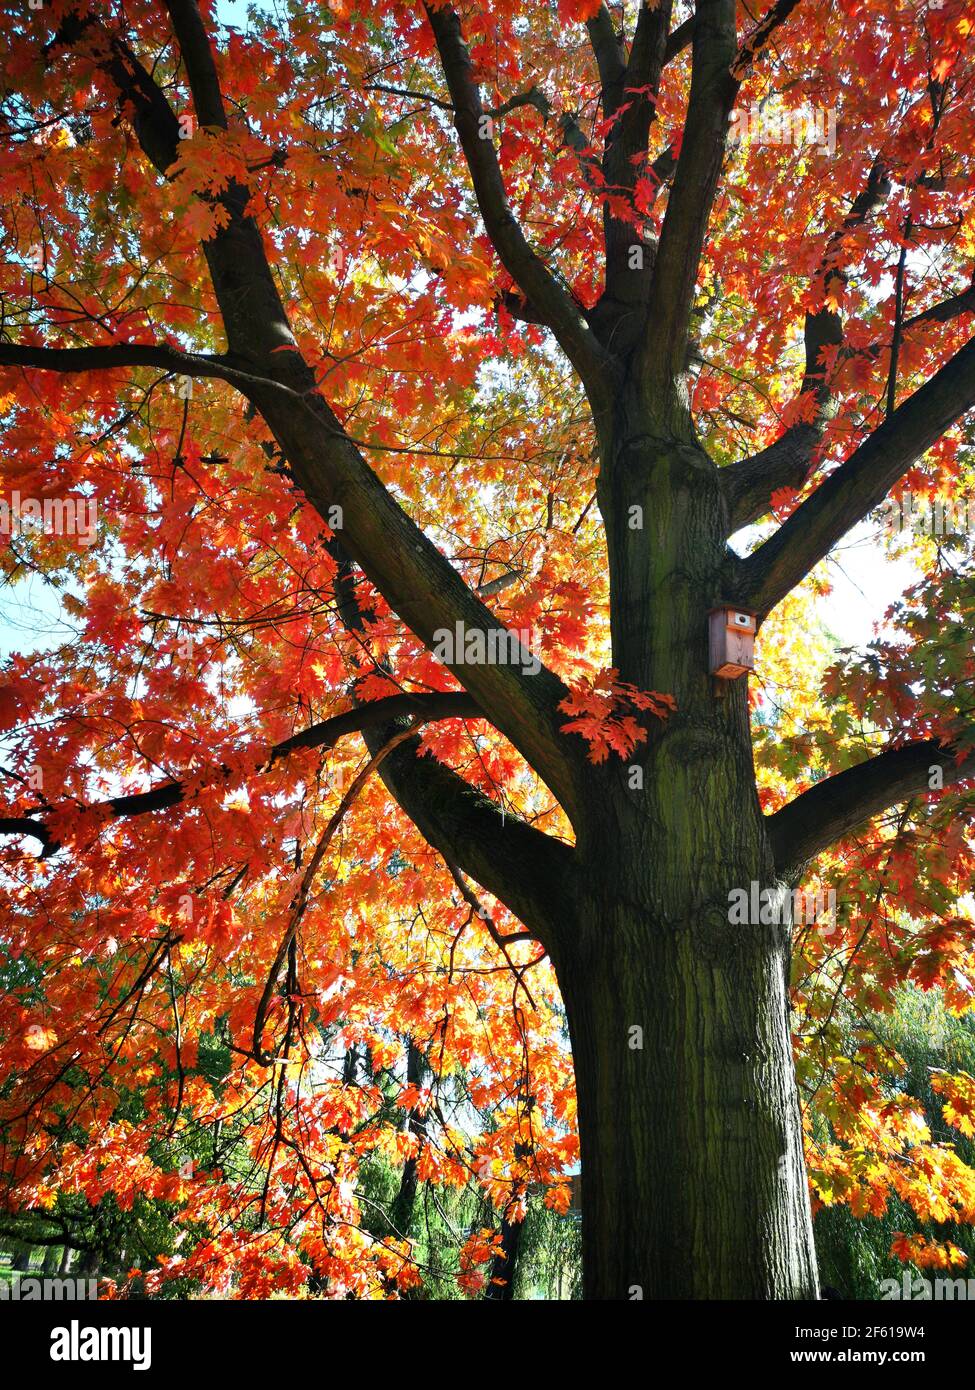 big and old oak tree with red autumnal leaves Stock Photo